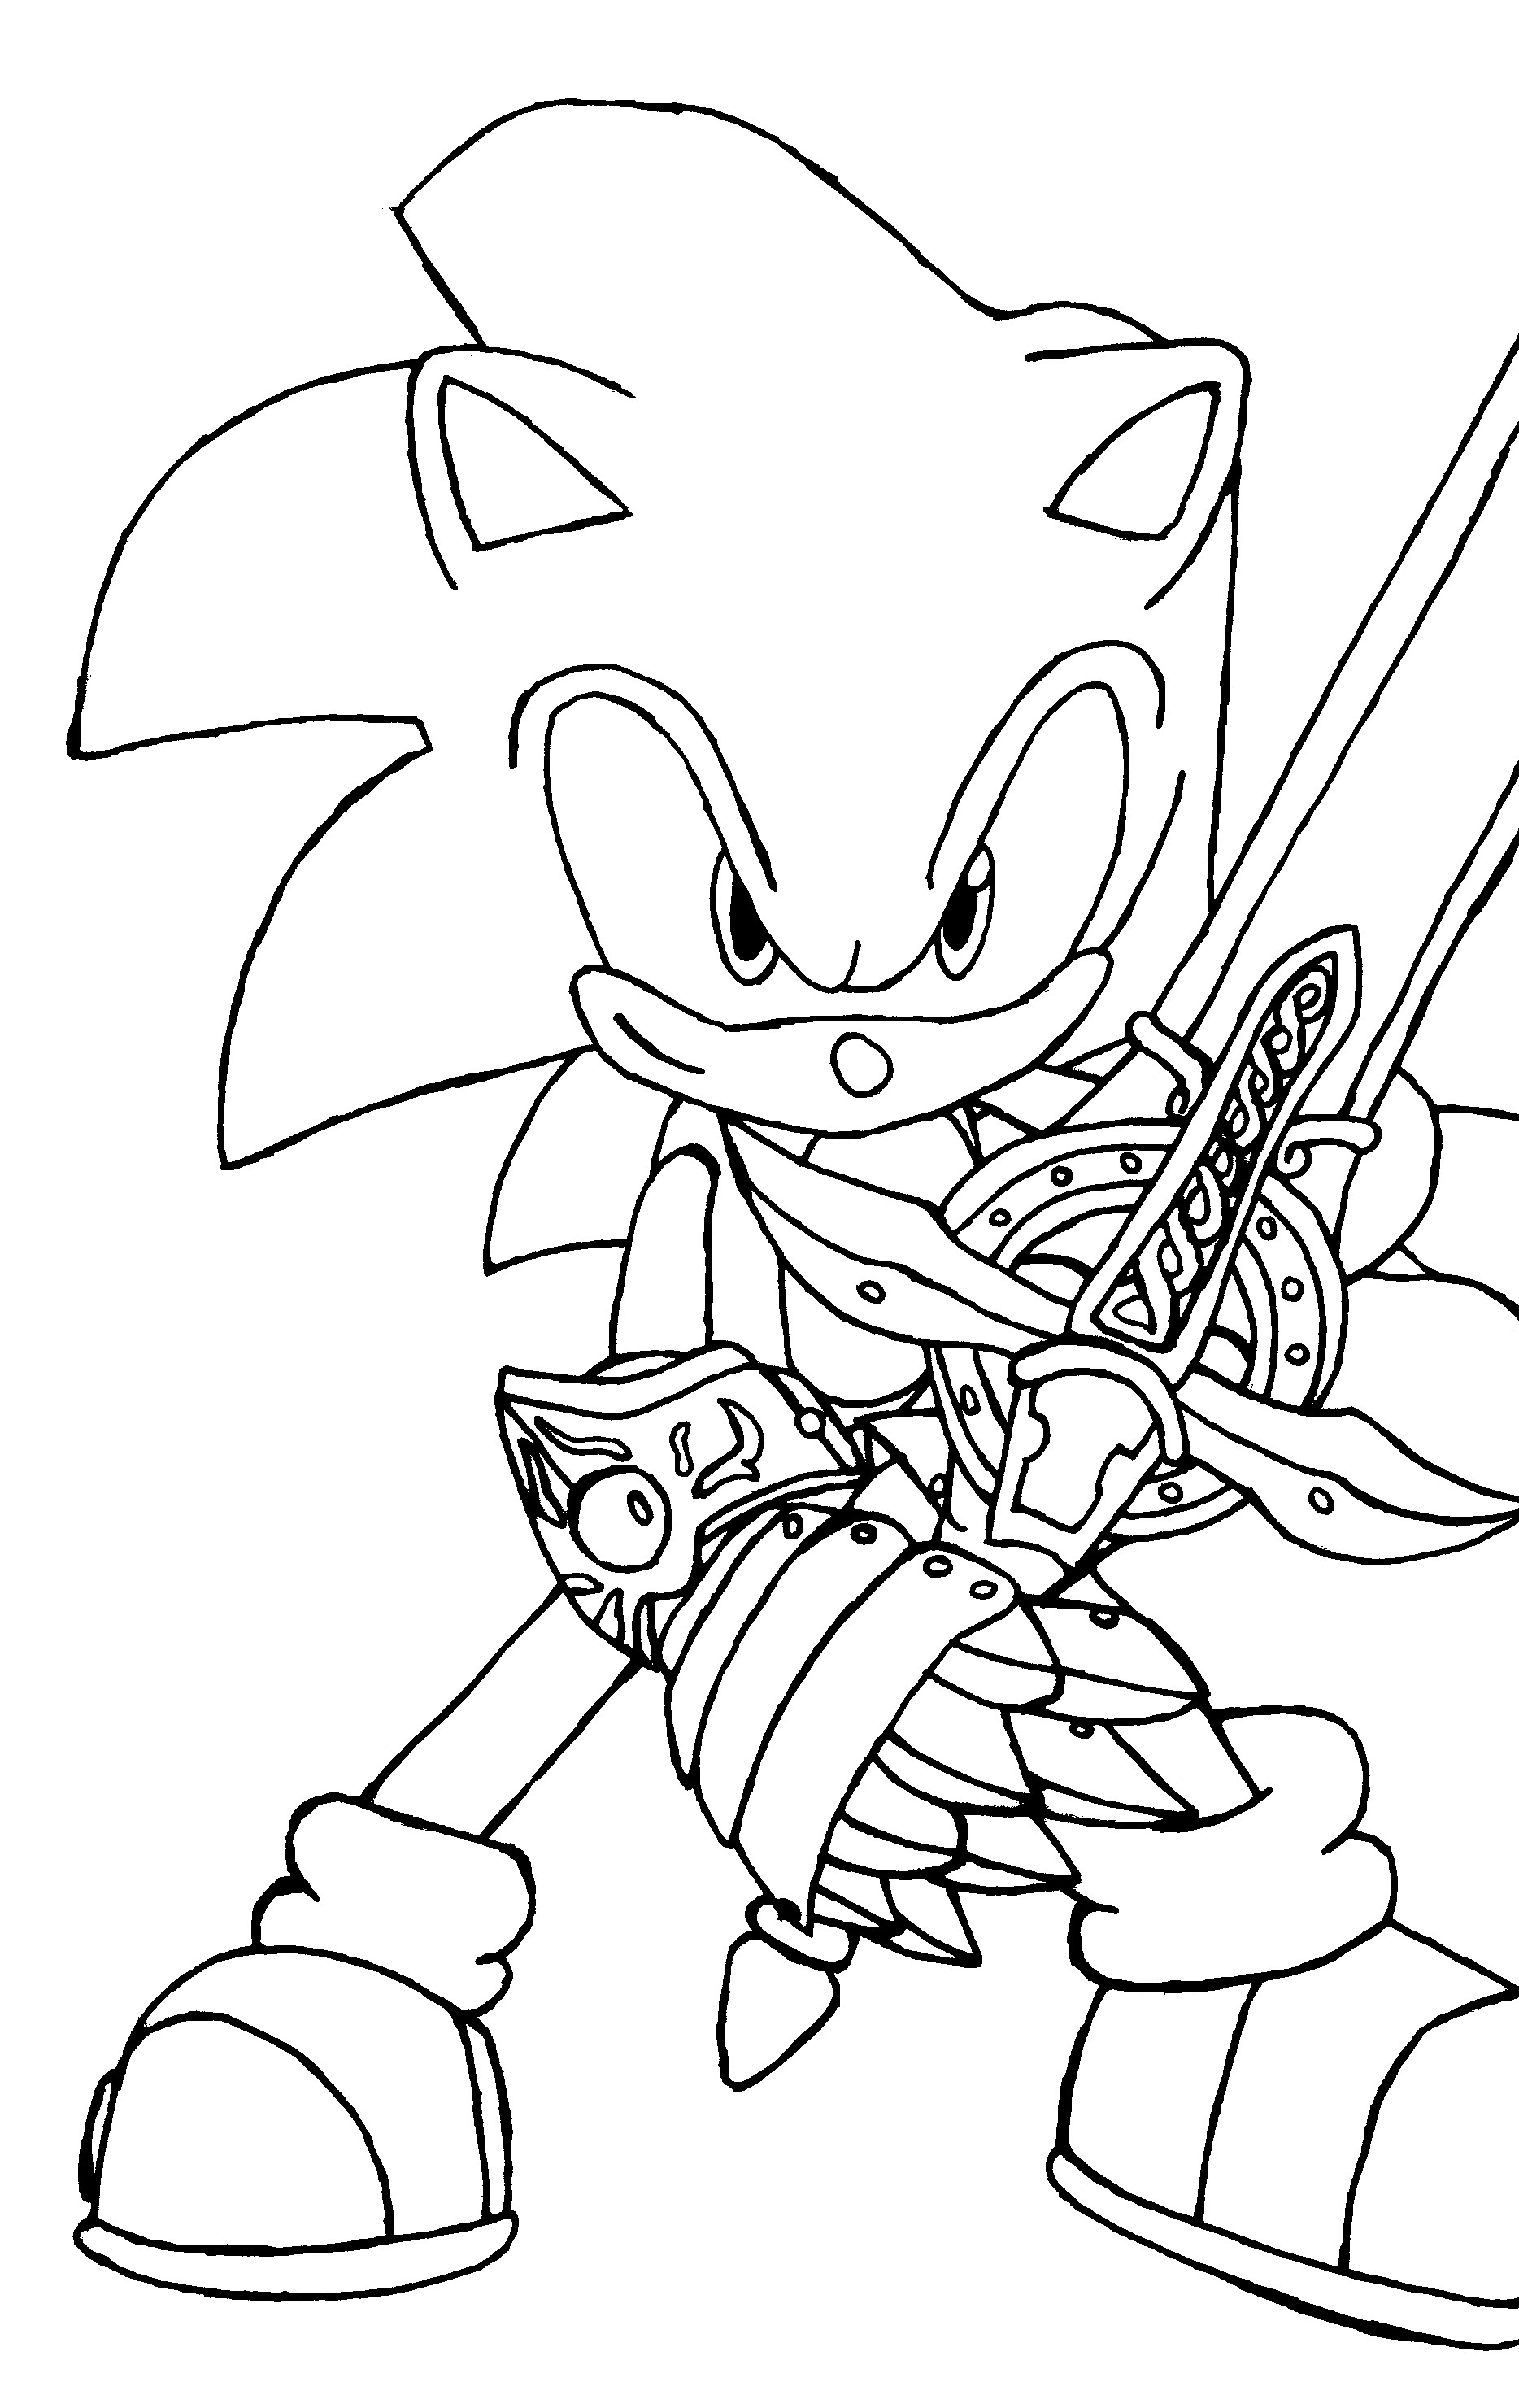 sonic coloring books sonic the hedgehog coloring pages to download and print books sonic coloring 